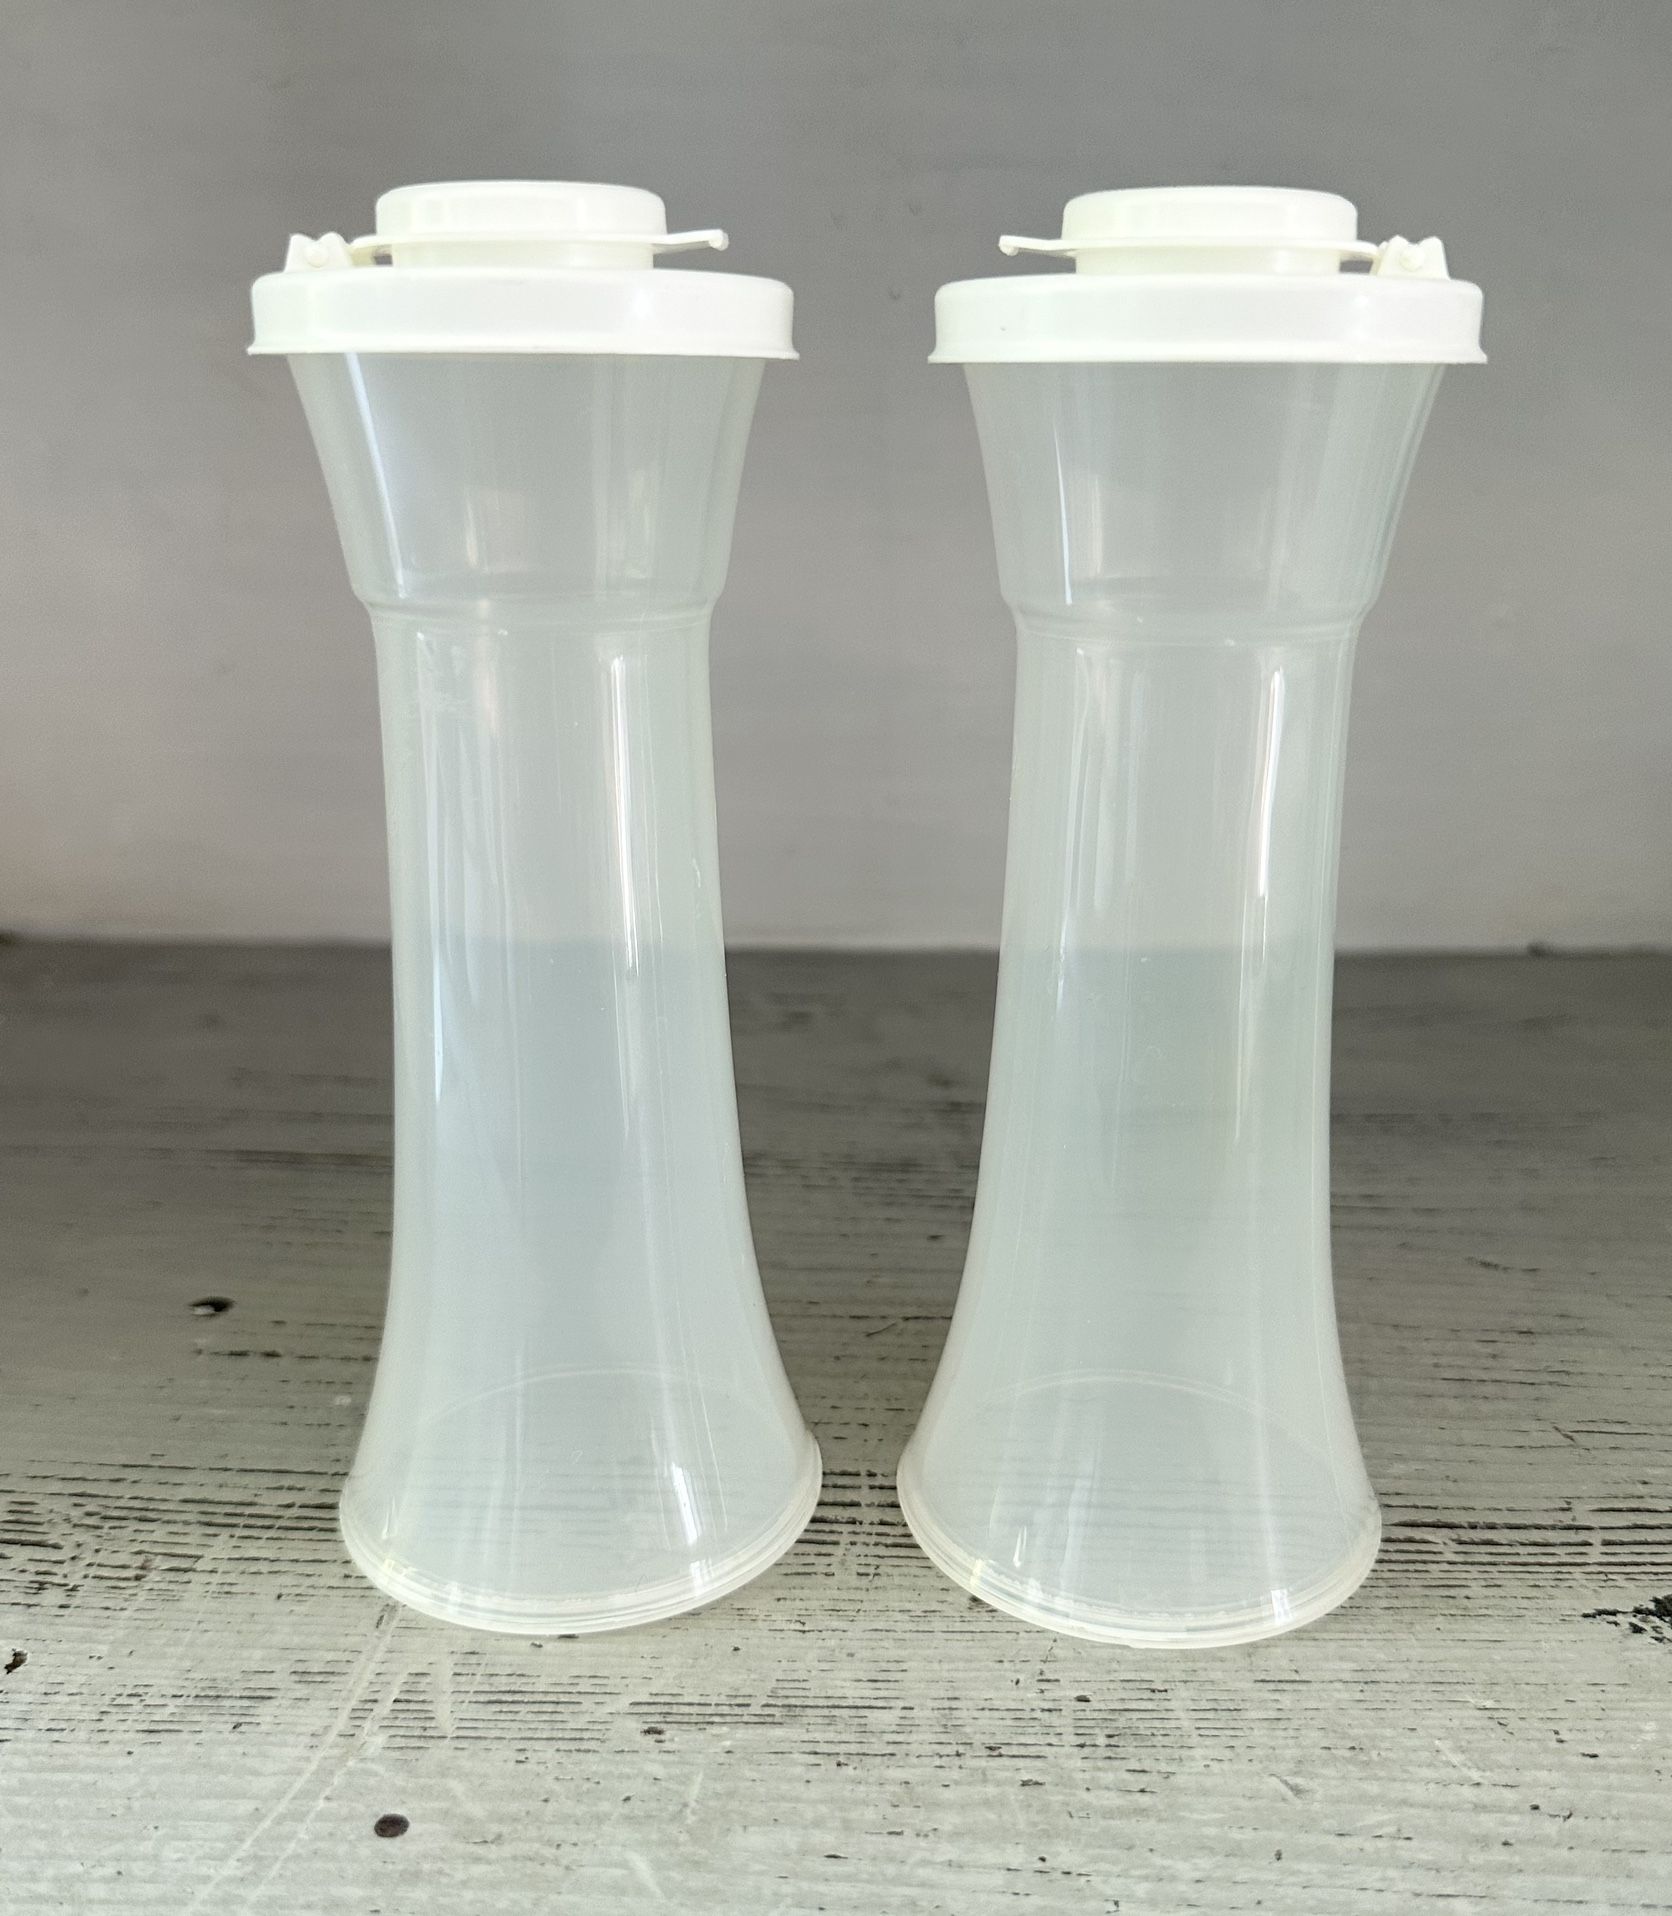  Tupperware hourglass salt and pepper shakers. Unused.  Clear body with white lids. These are the large size at 6 1/4” tall. 